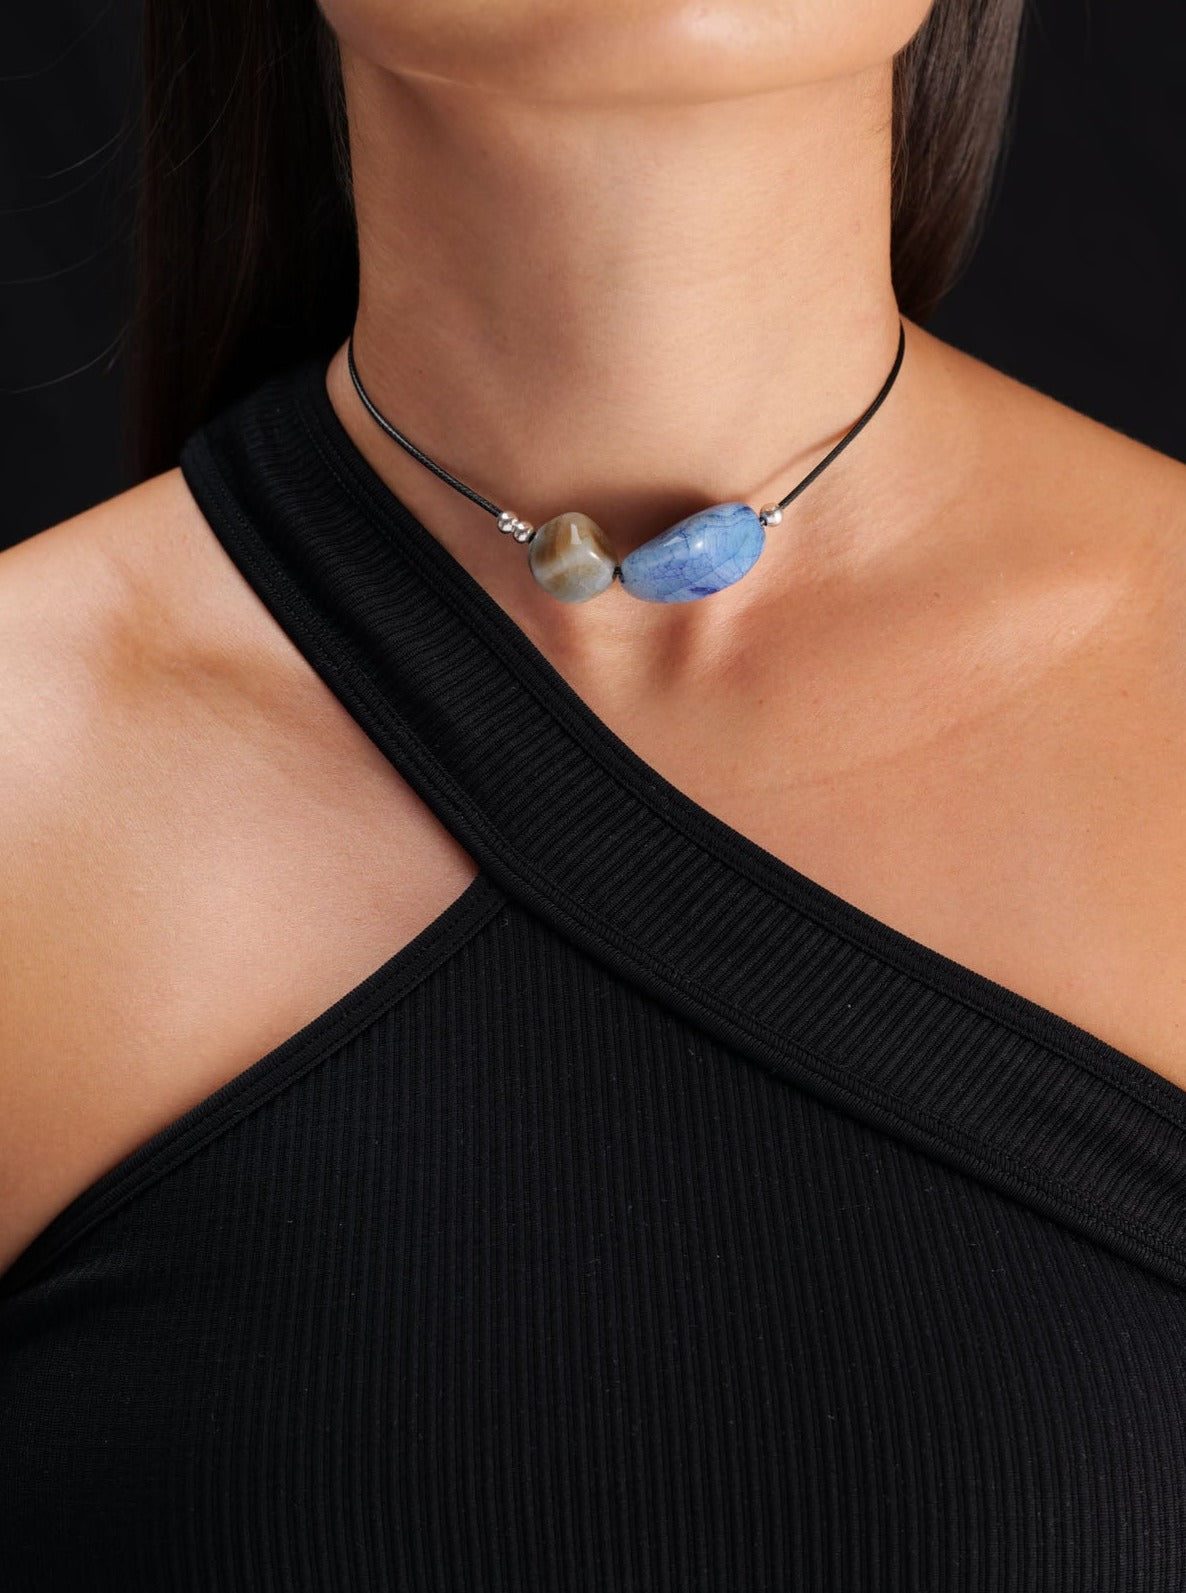 Agate Stone Necklace #2 Blue/ Grey